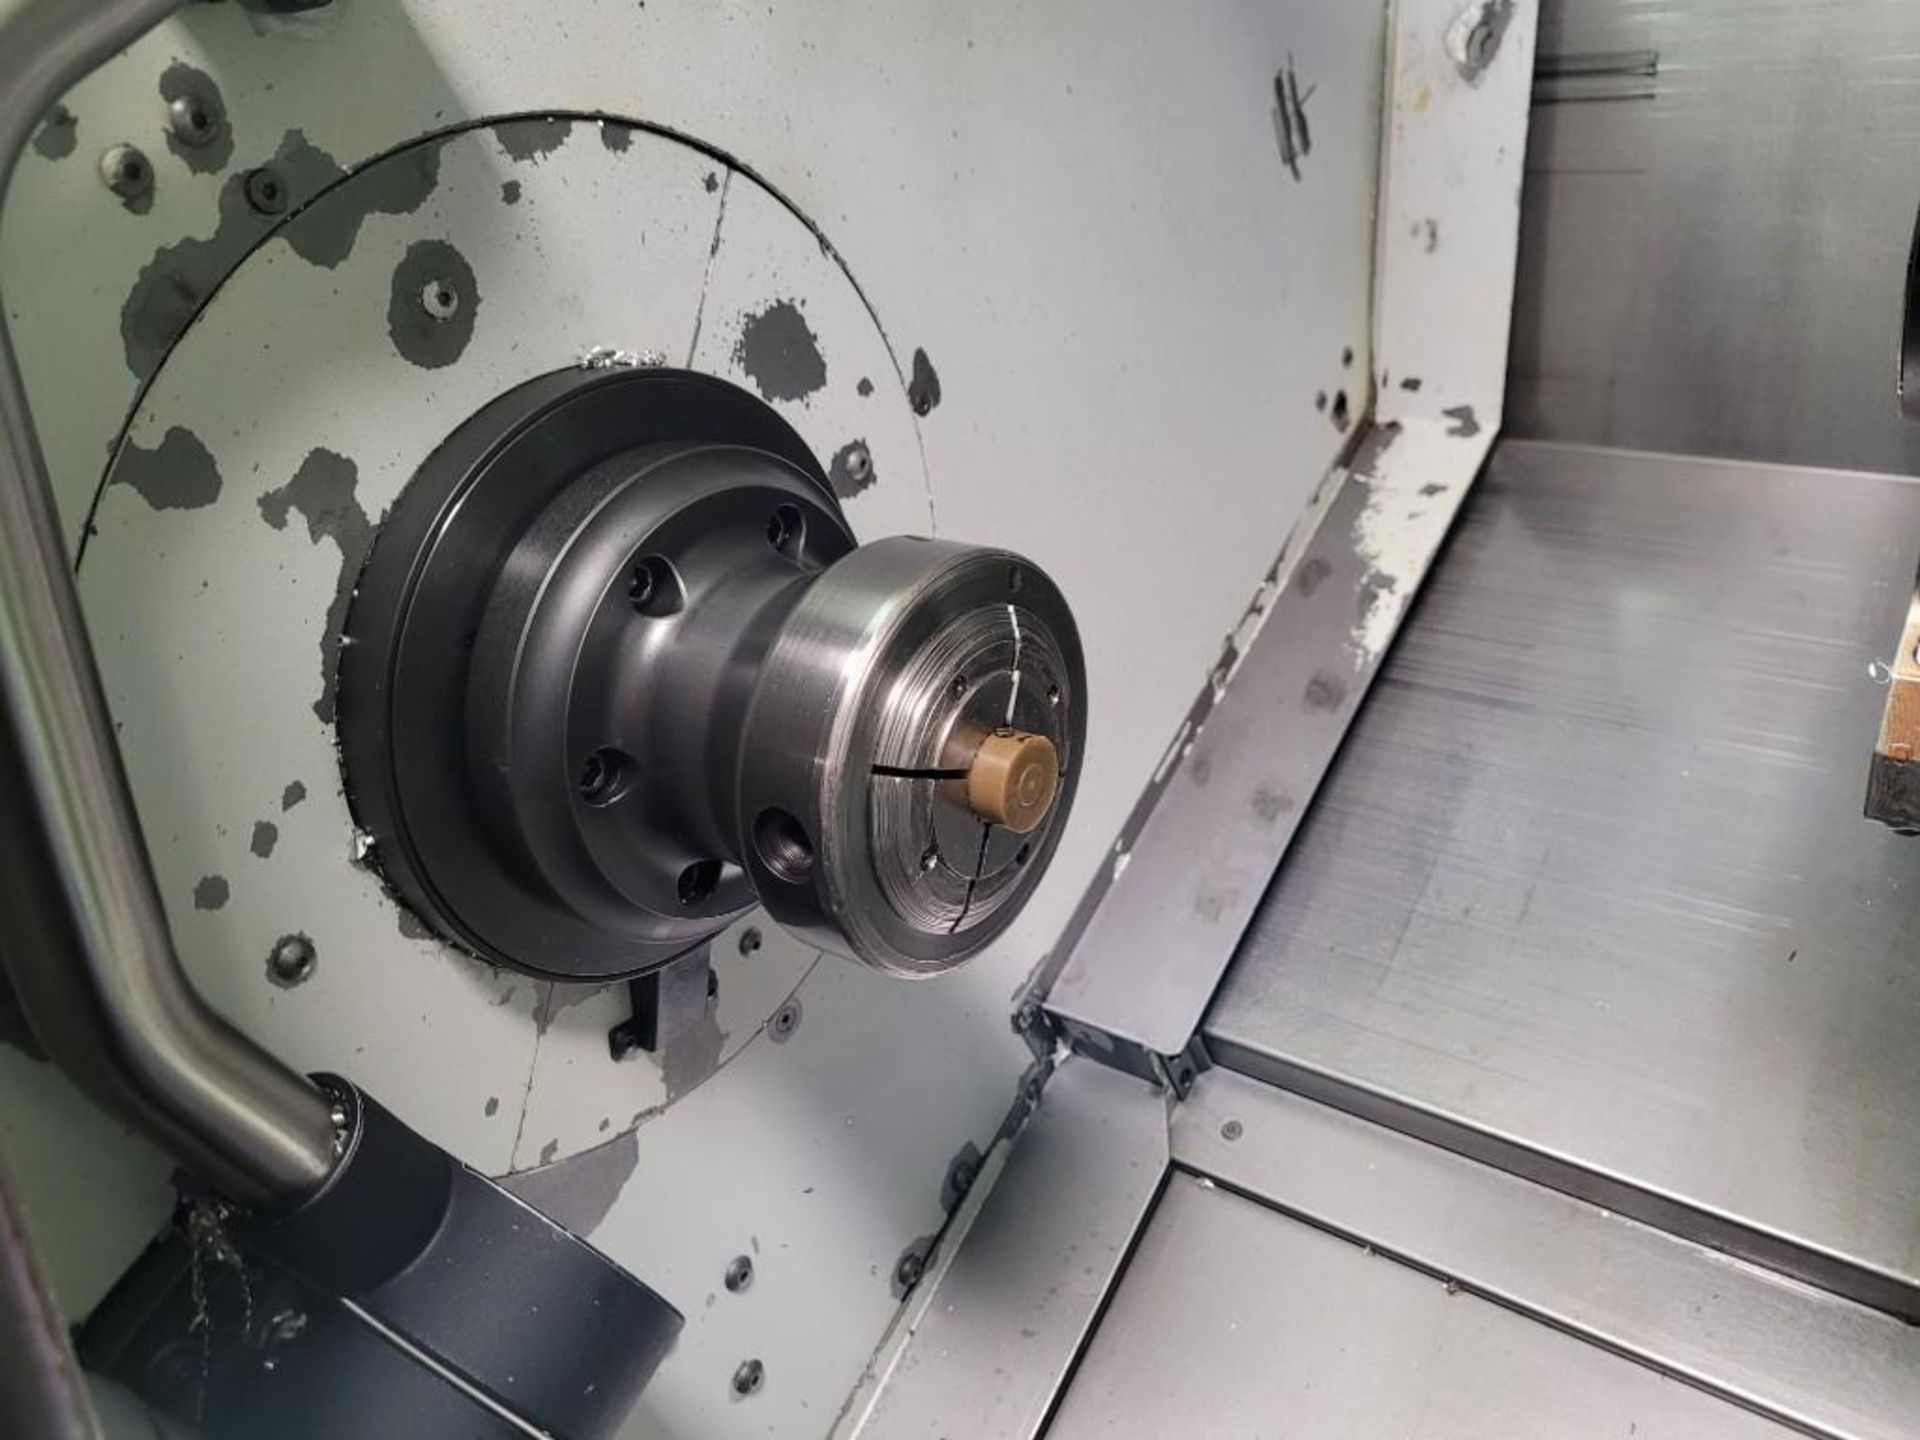 Mori Seiki NL2000Y CNC Turning Center, MSX-850III Control, Y-Axis, Collet Chuck, New 2005 - Image 8 of 13